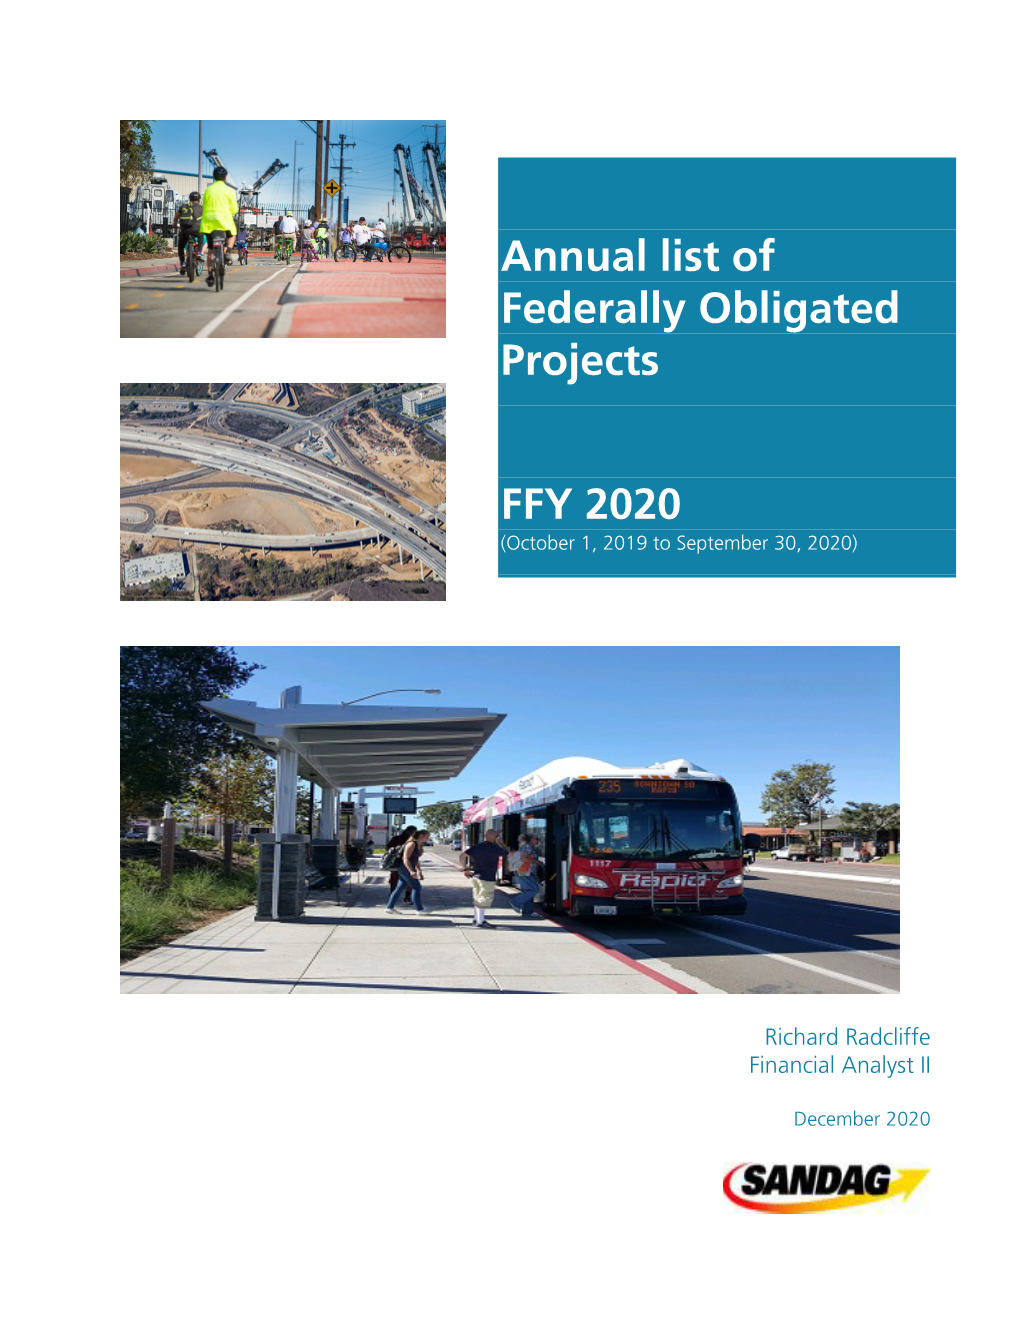 Annual List of Federally Obligated Projects FFY 2020